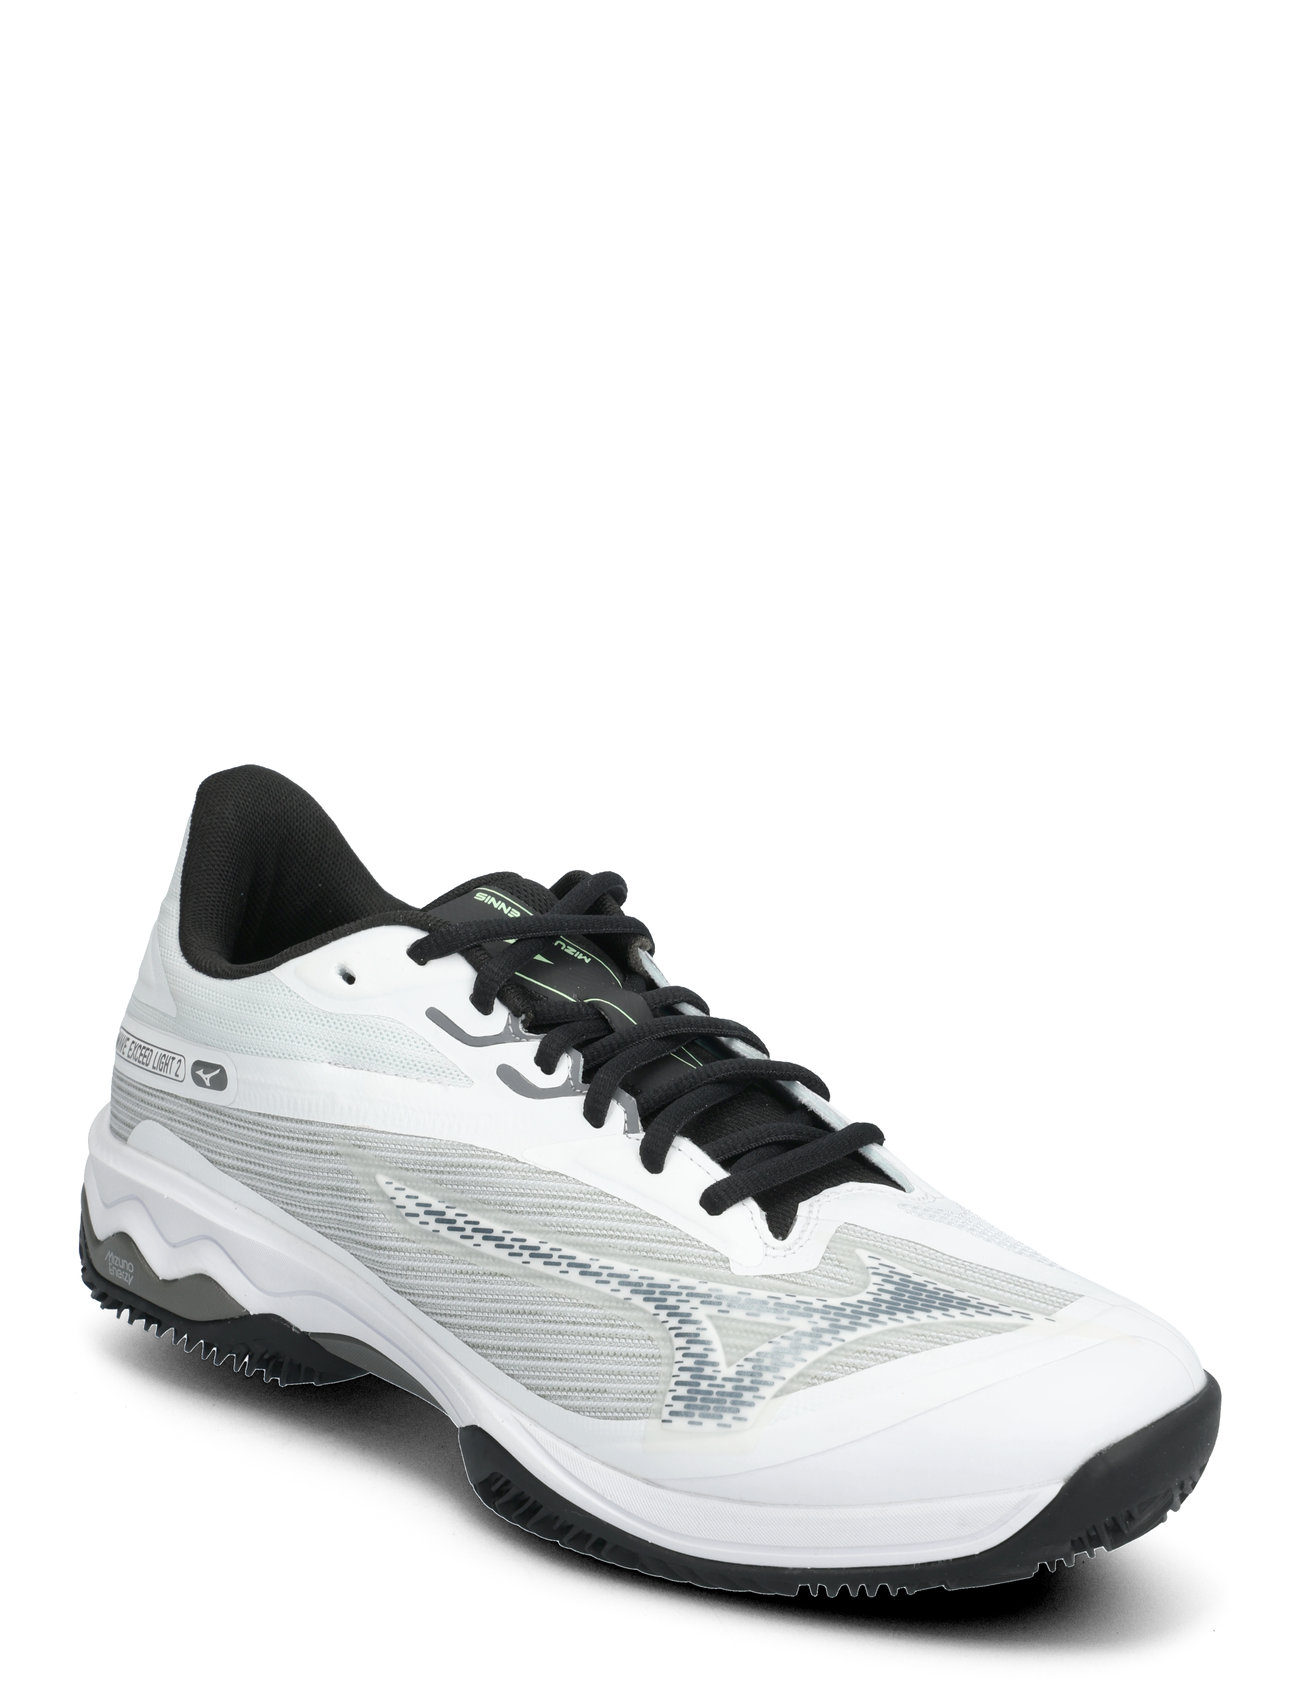 Wave Exceed Light 2 Sport Sport Shoes Racketsports Shoes Tennis Shoes White Mizuno